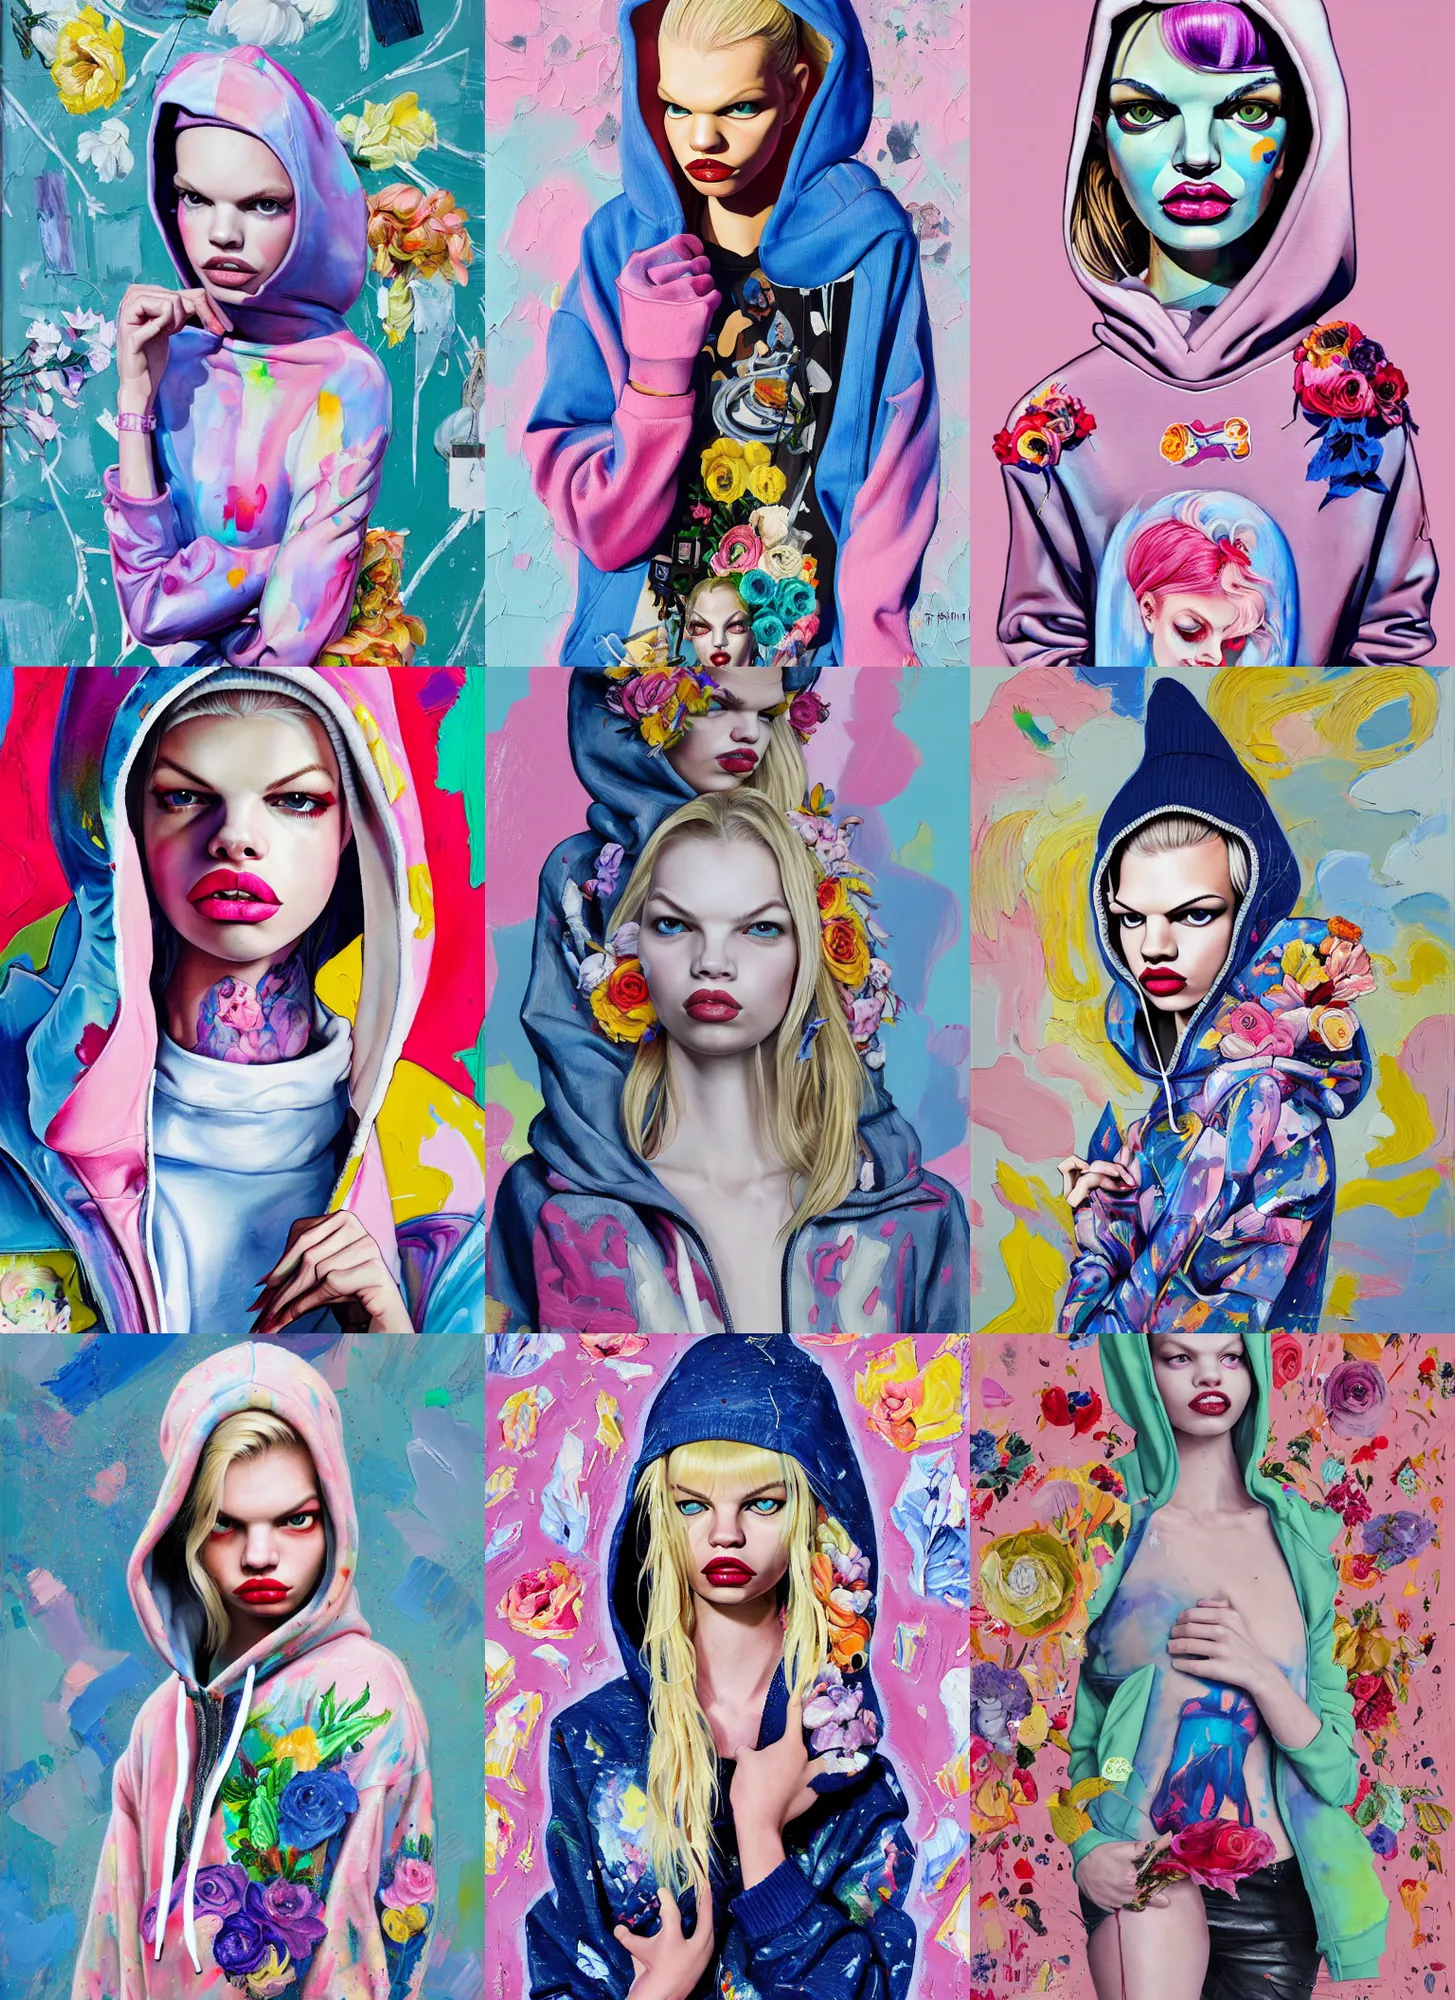 Prompt: daphne groeneveld wearing a hoodie standing in a township street in the style of martine johanna, street clothing, haute couture! fashion!, full figure painting by andrei riabovitchev, tara mcpherson, david choe, decorative flowers, detailed painterly impasto brushwork, pastel color palette, die antwoord